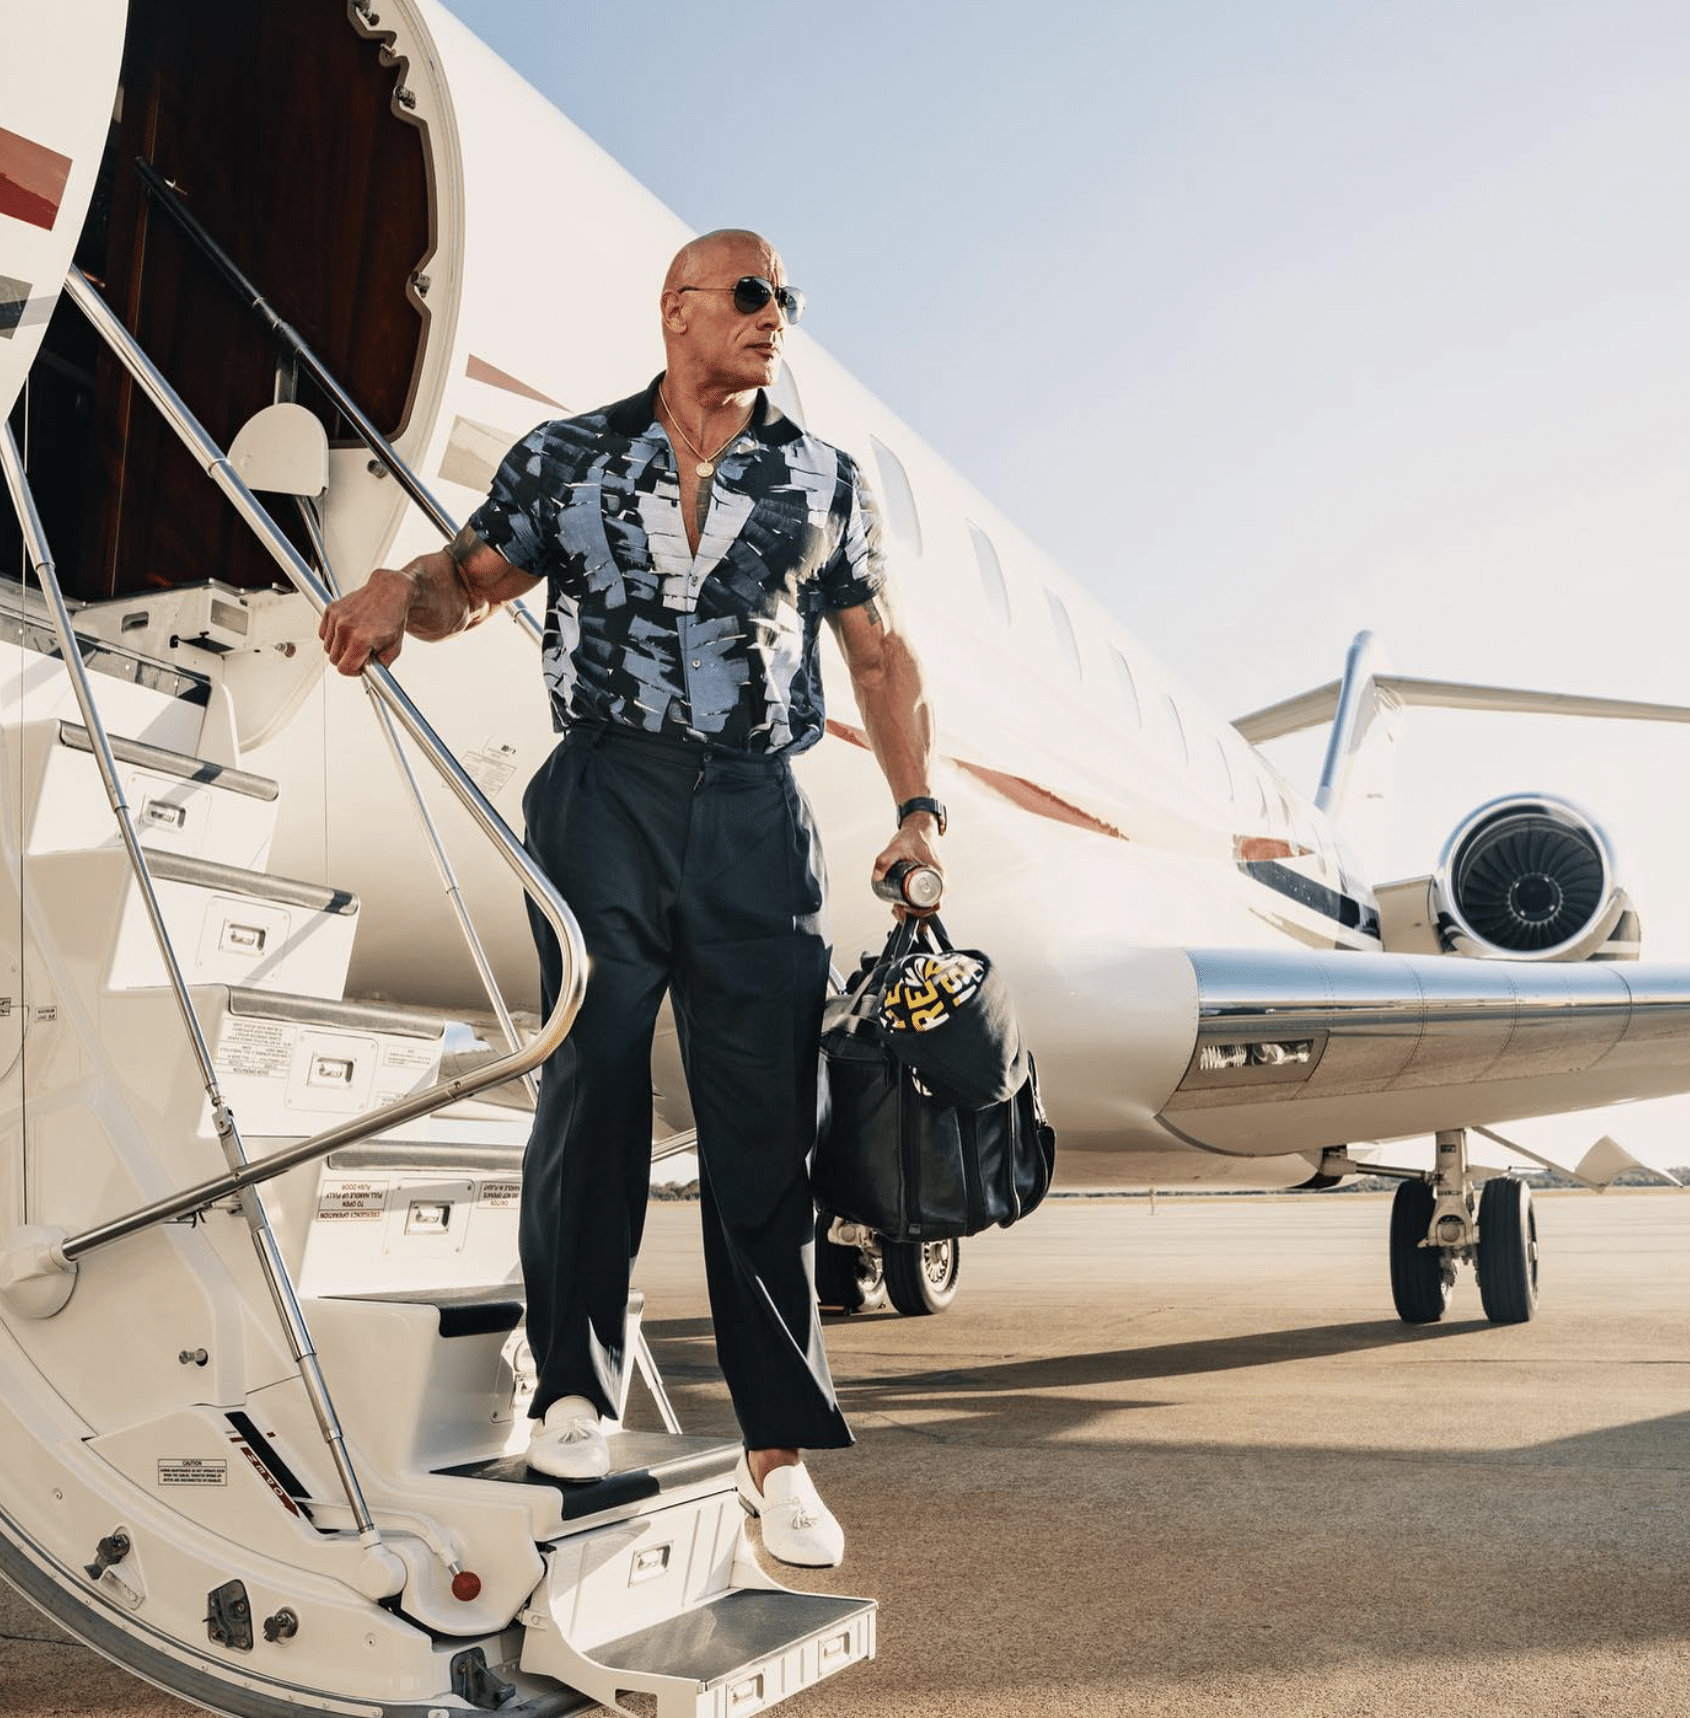 Dwayne Johnson owns one of the world's fastest private jets